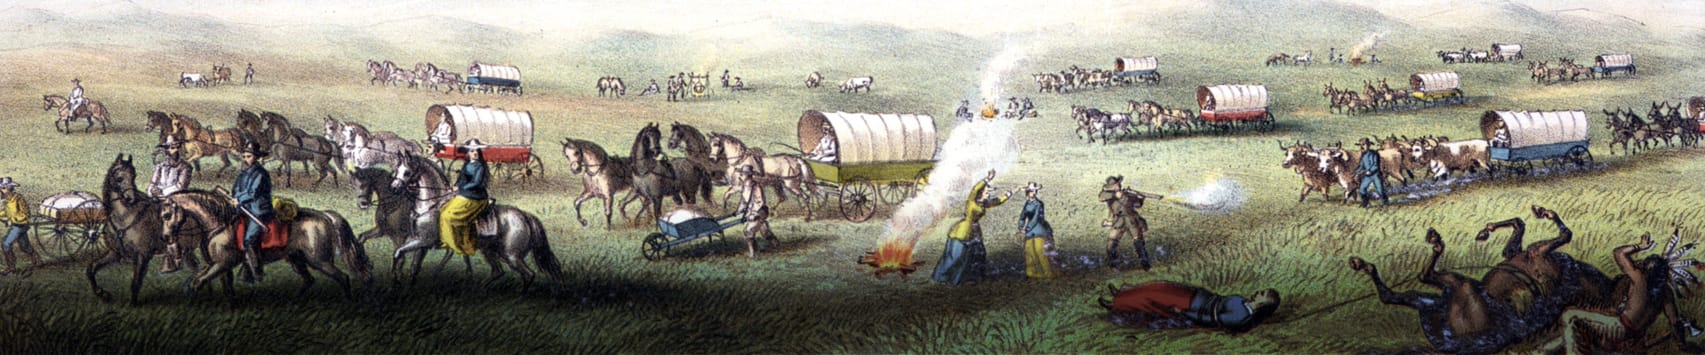 Panoramic painting of wagon trains crossing low hills. In the foreground, a pioneer shoots a rifle at a Native American, whose horse has fallen over.